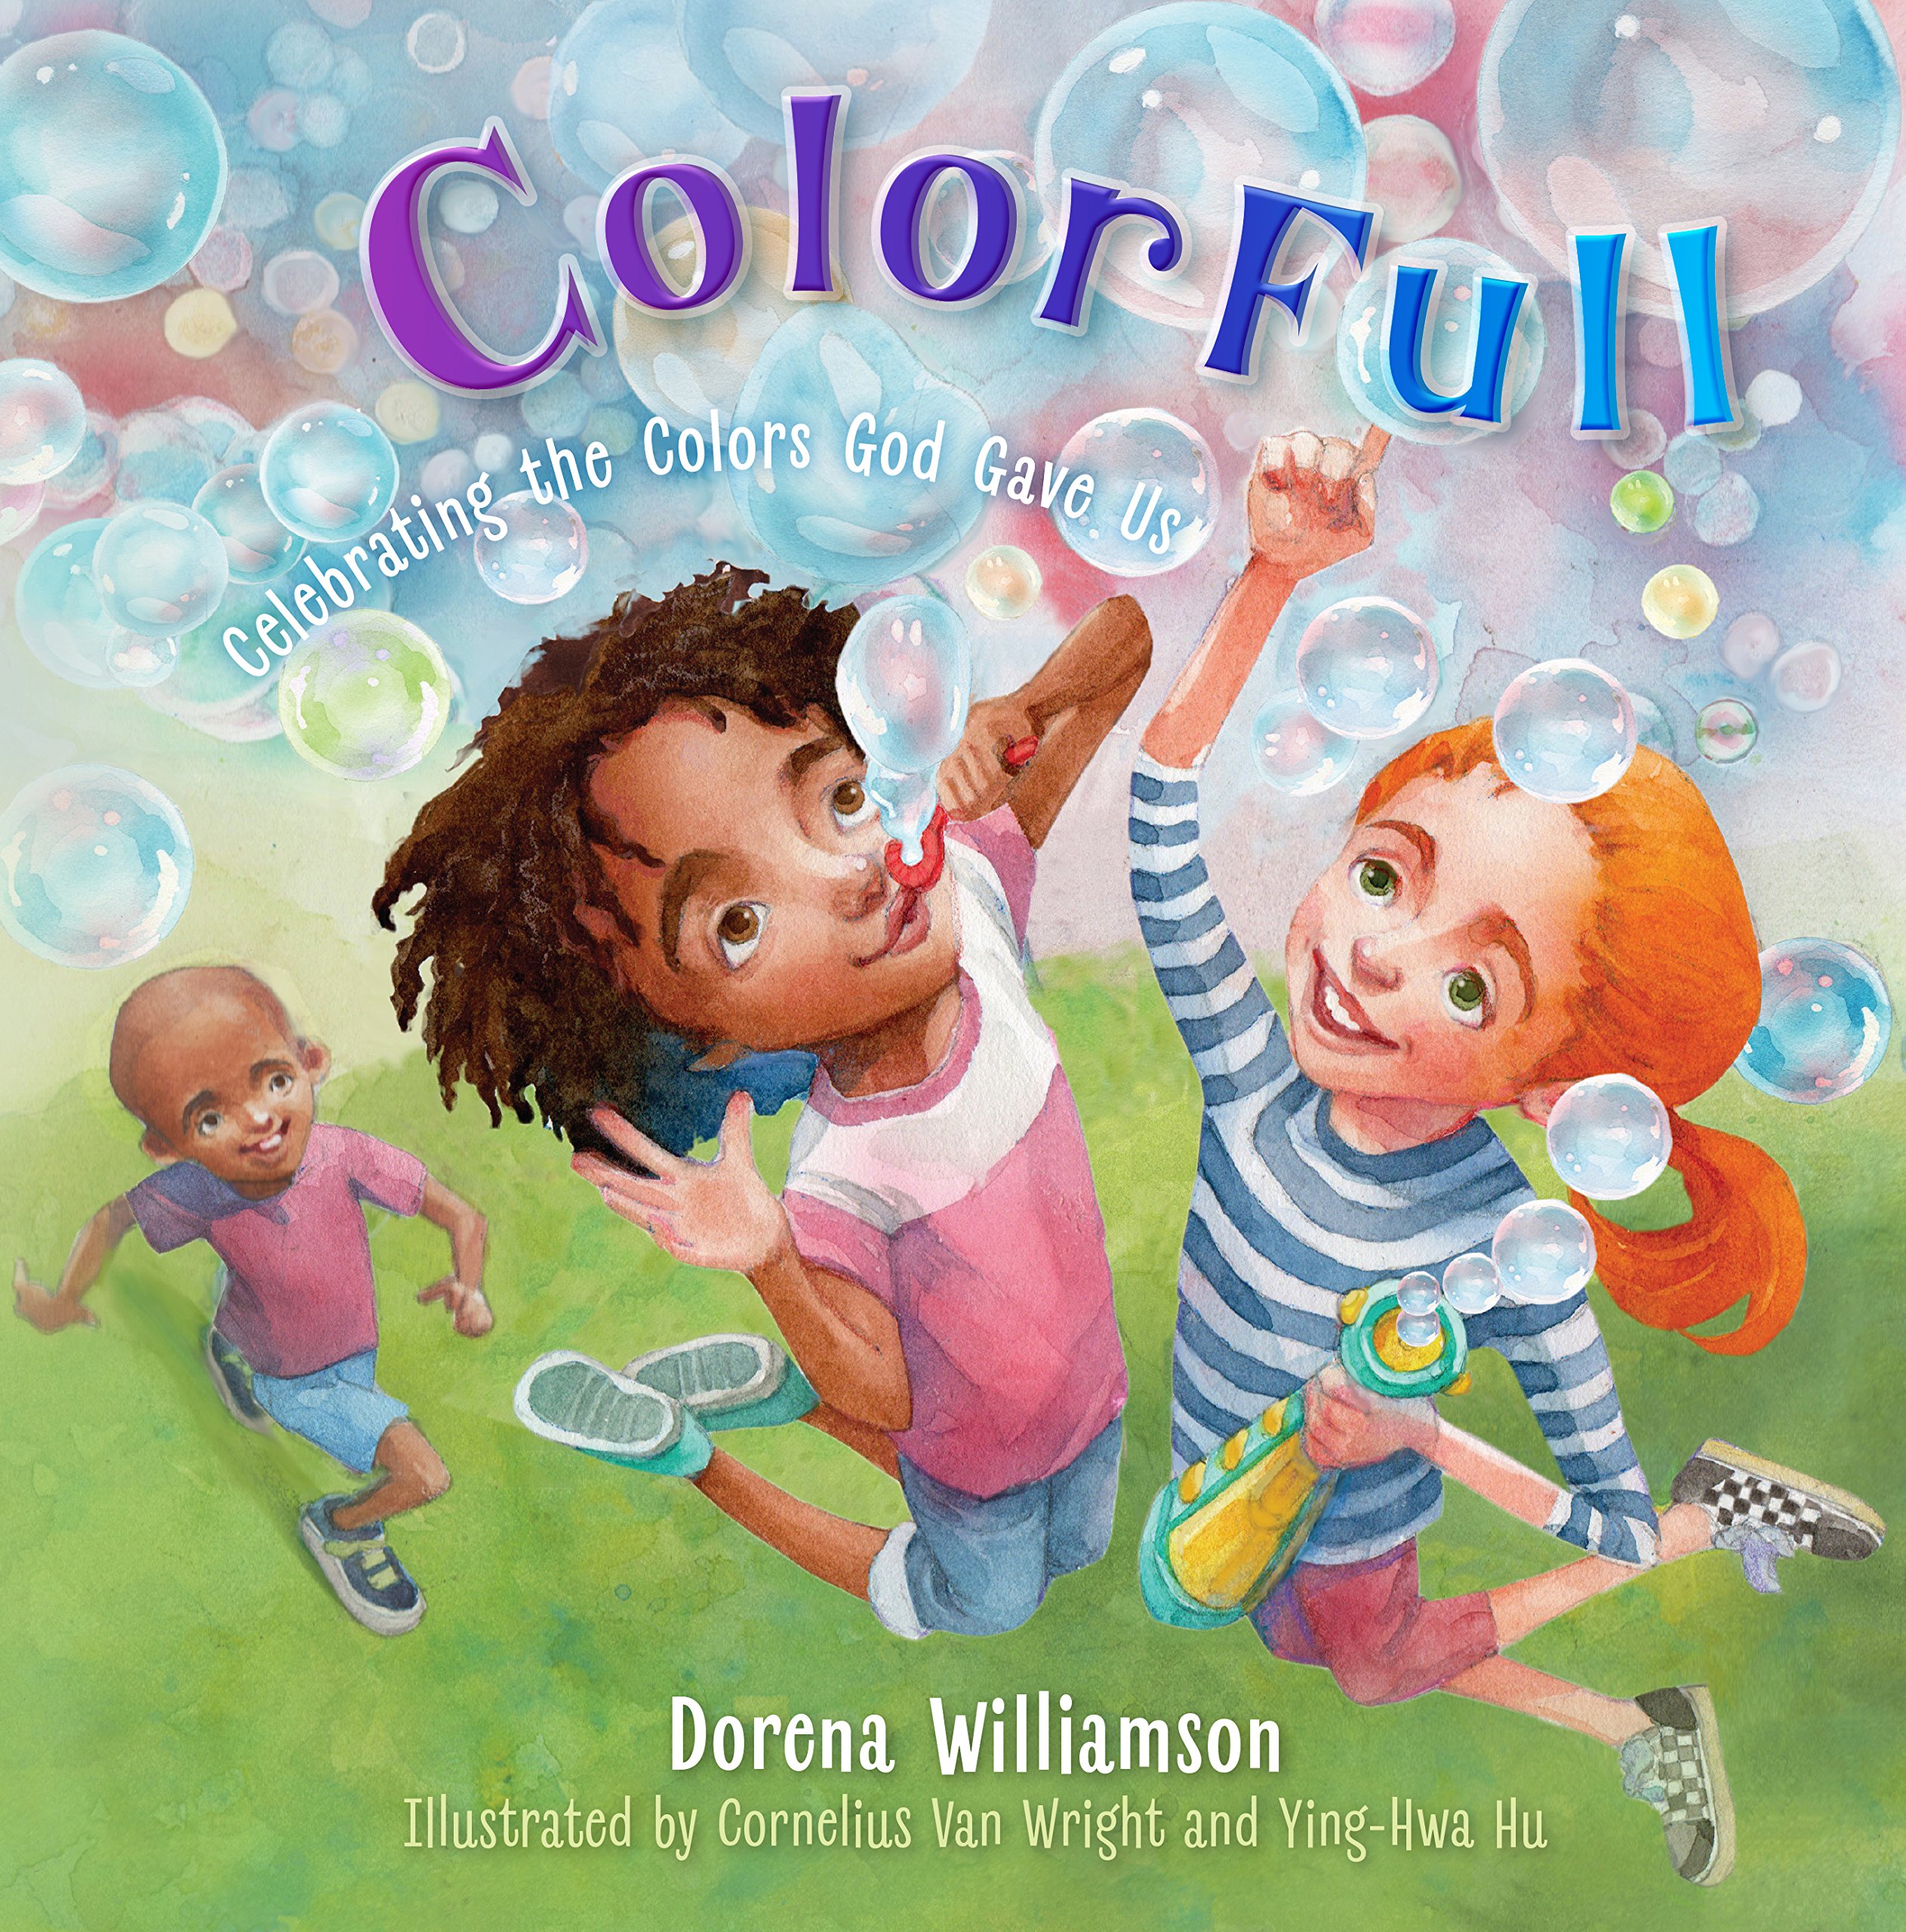 Colorfull by Dorena Williamson | Book Review